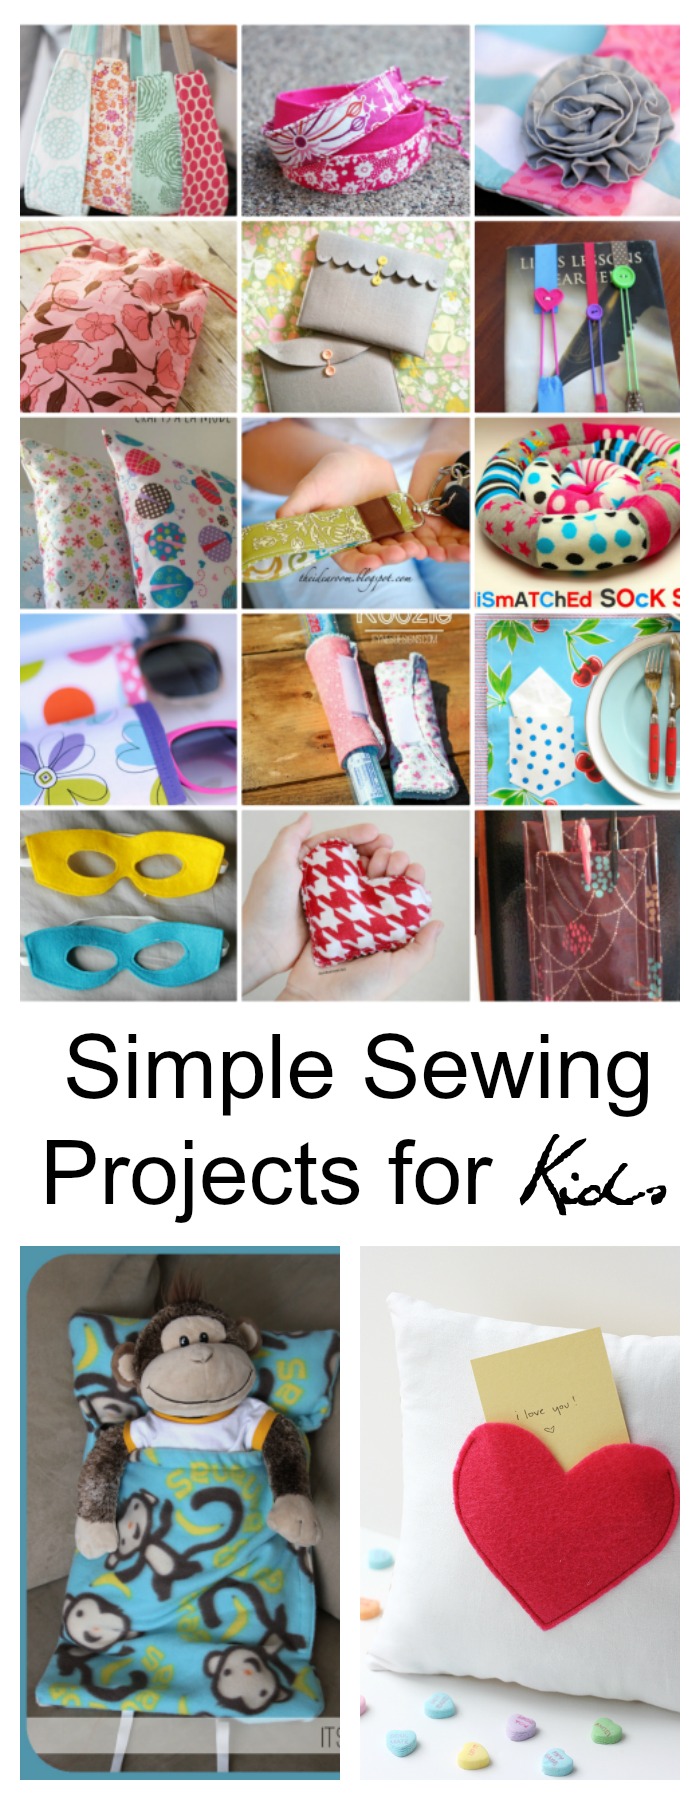 Easy sewing patterns for kids - Fun Crafts Kids